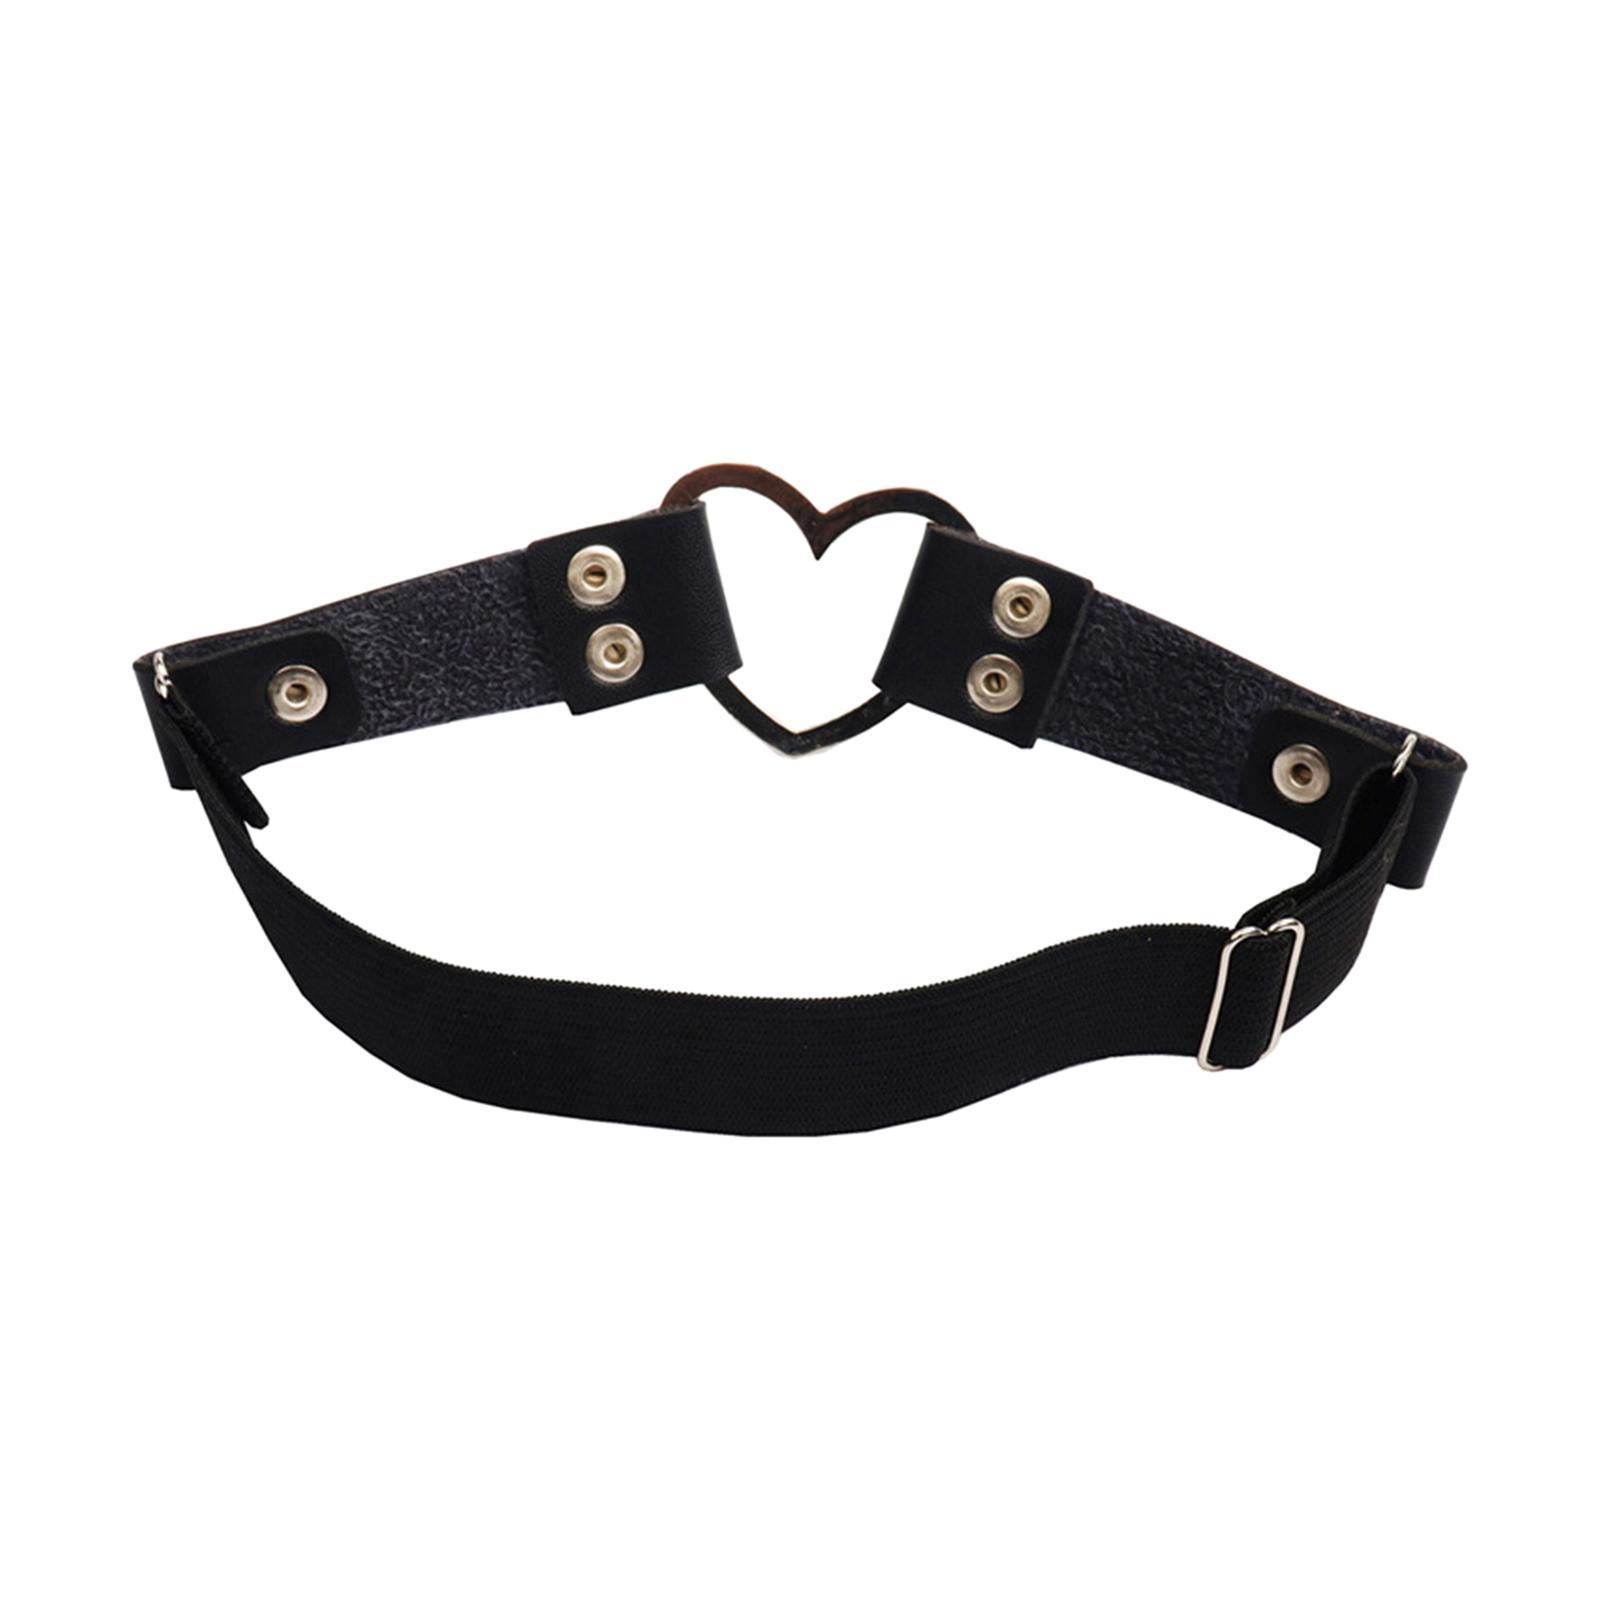 Thigh Garter Heart Shaped Punk Black Gothic Nonslip Chic for Cosplay Party